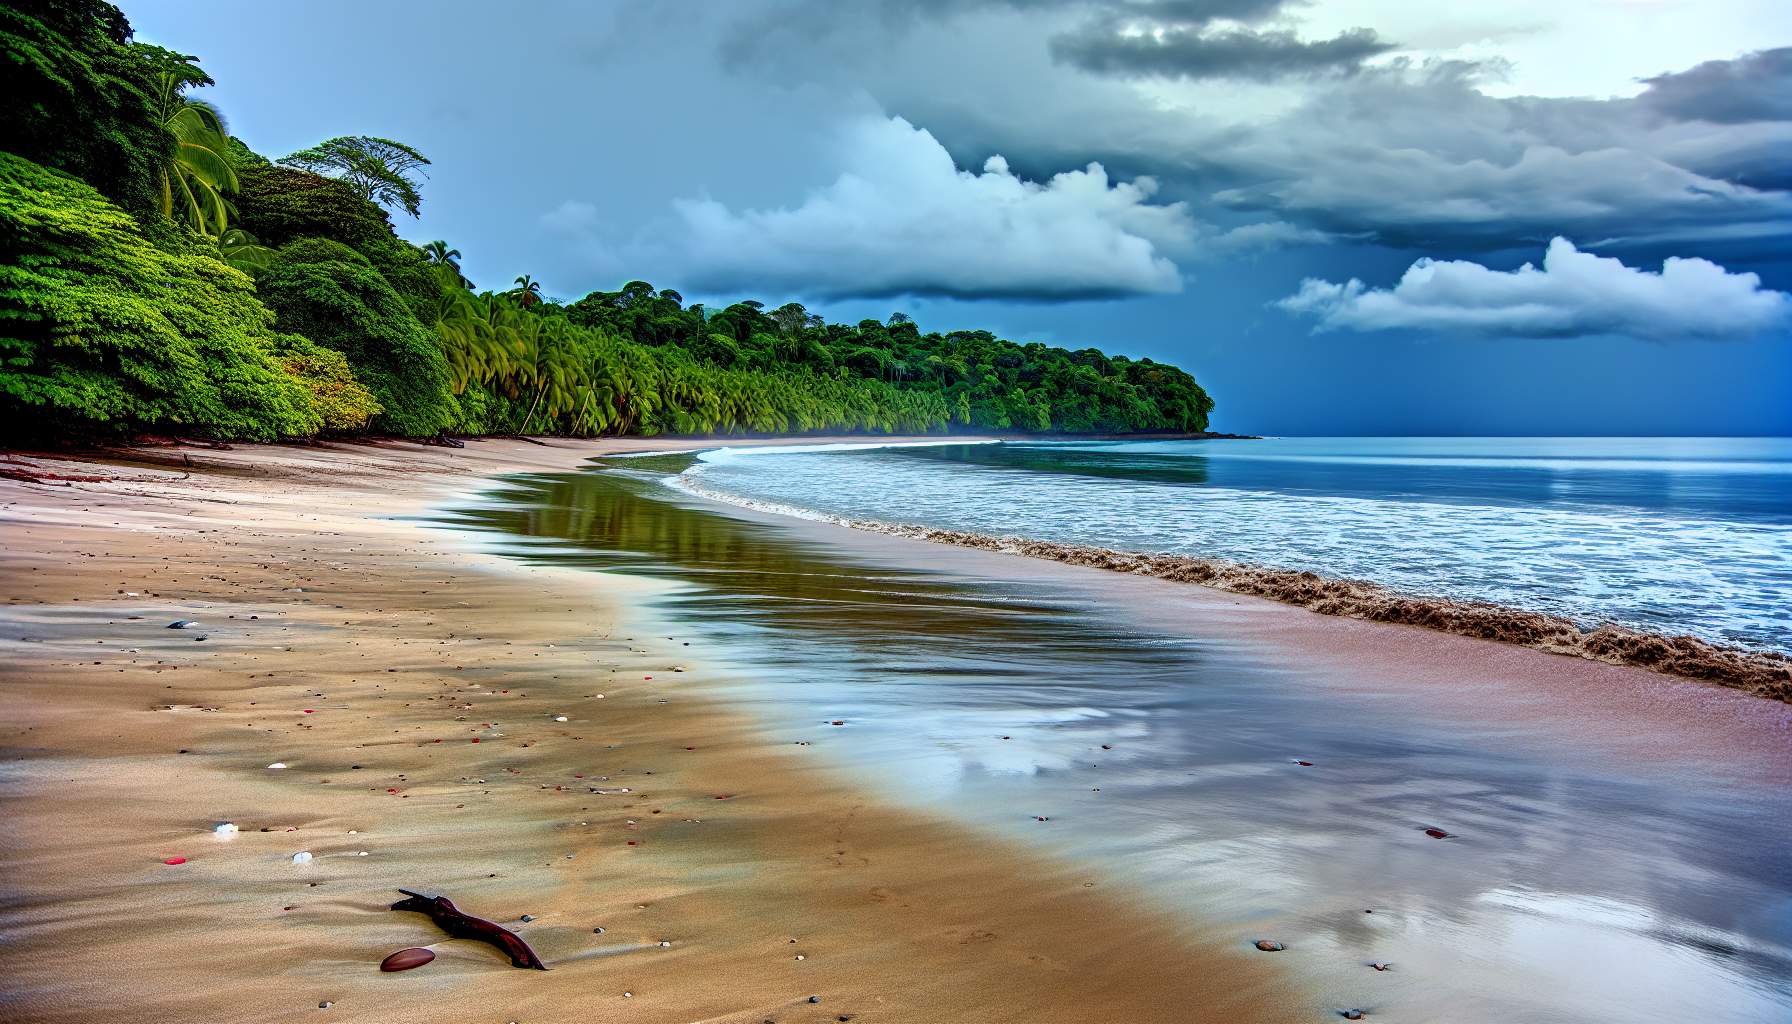 Quiet beach with fewer tourists during rainy season in Costa Rica